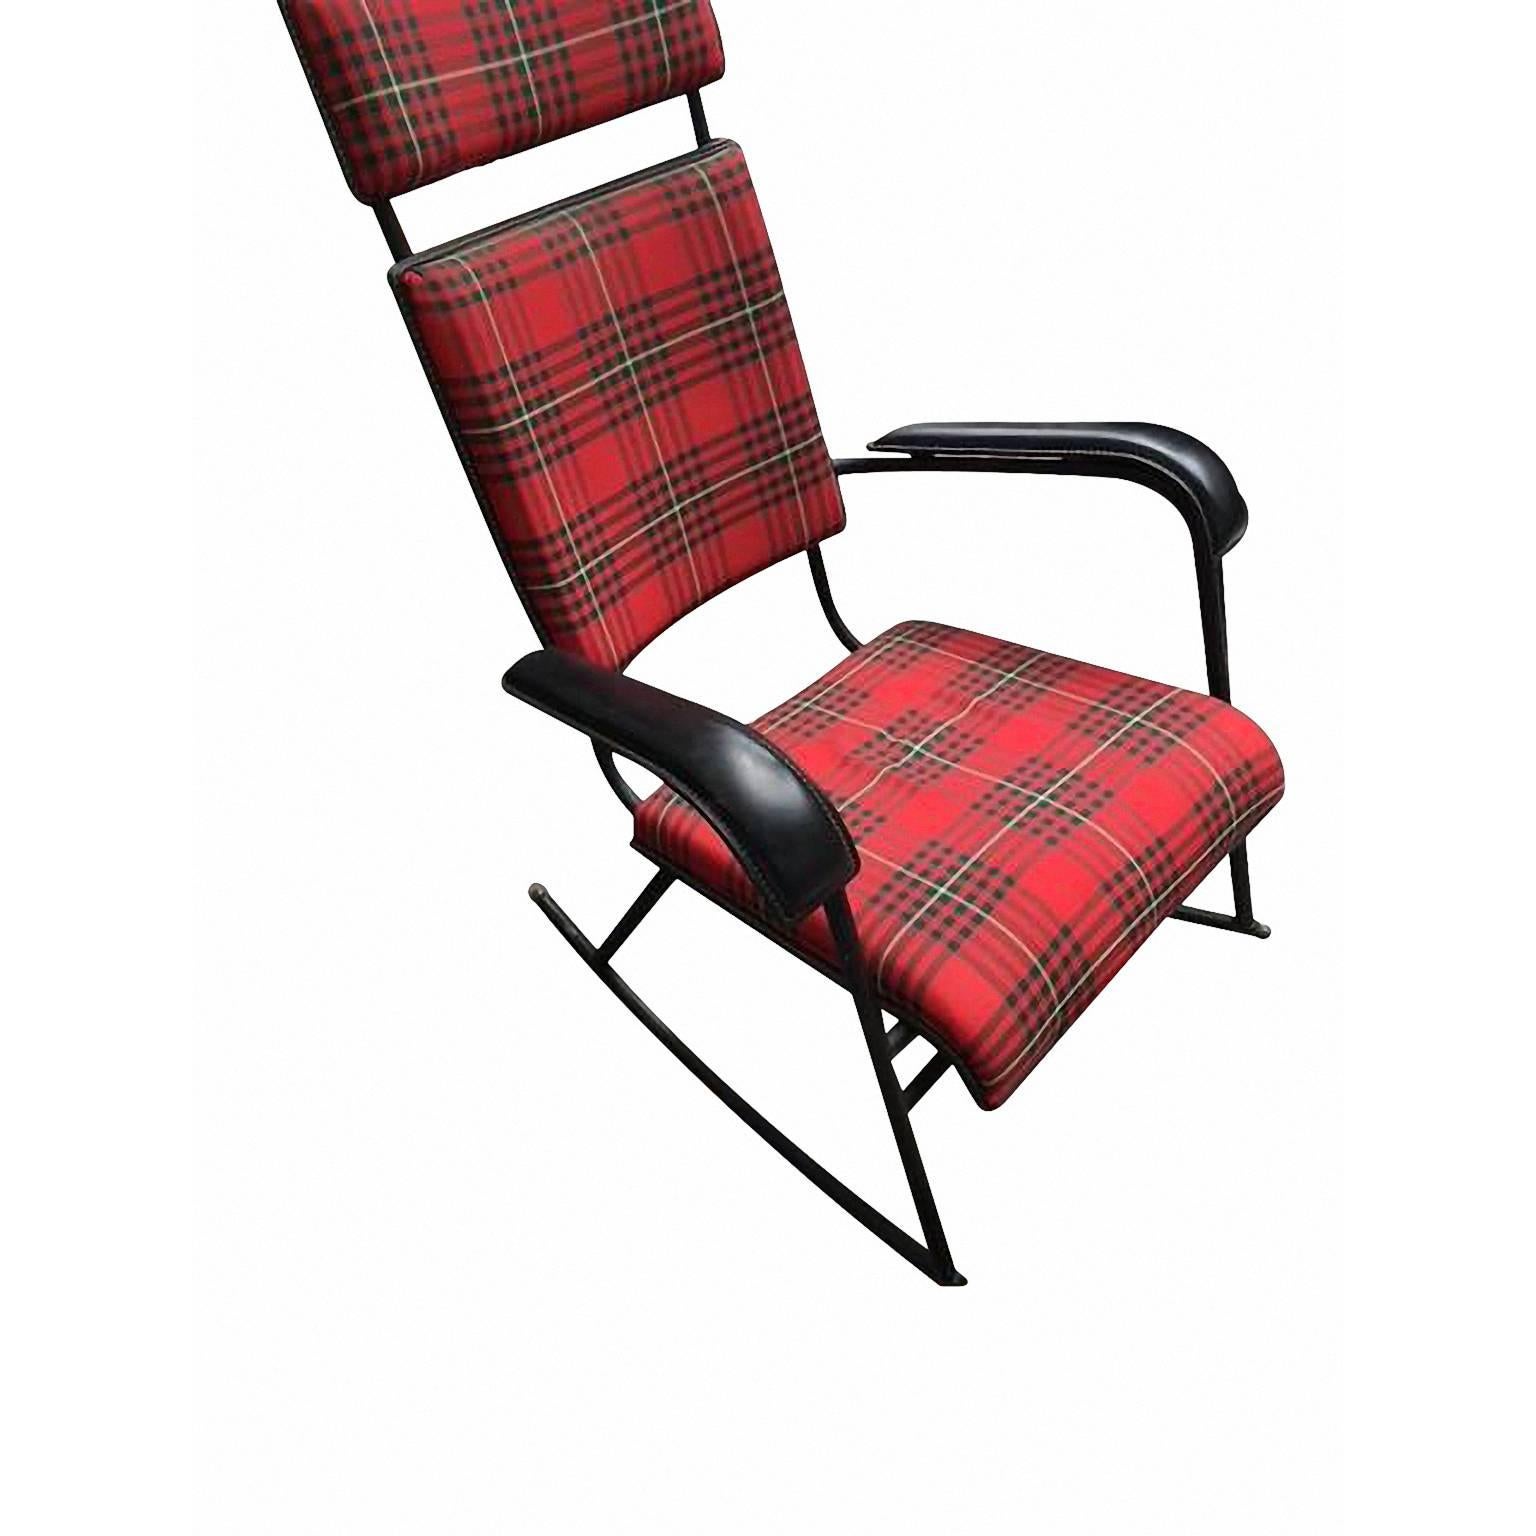 French Jacques Adnet 1950s Rare Tartan Rocking Chair